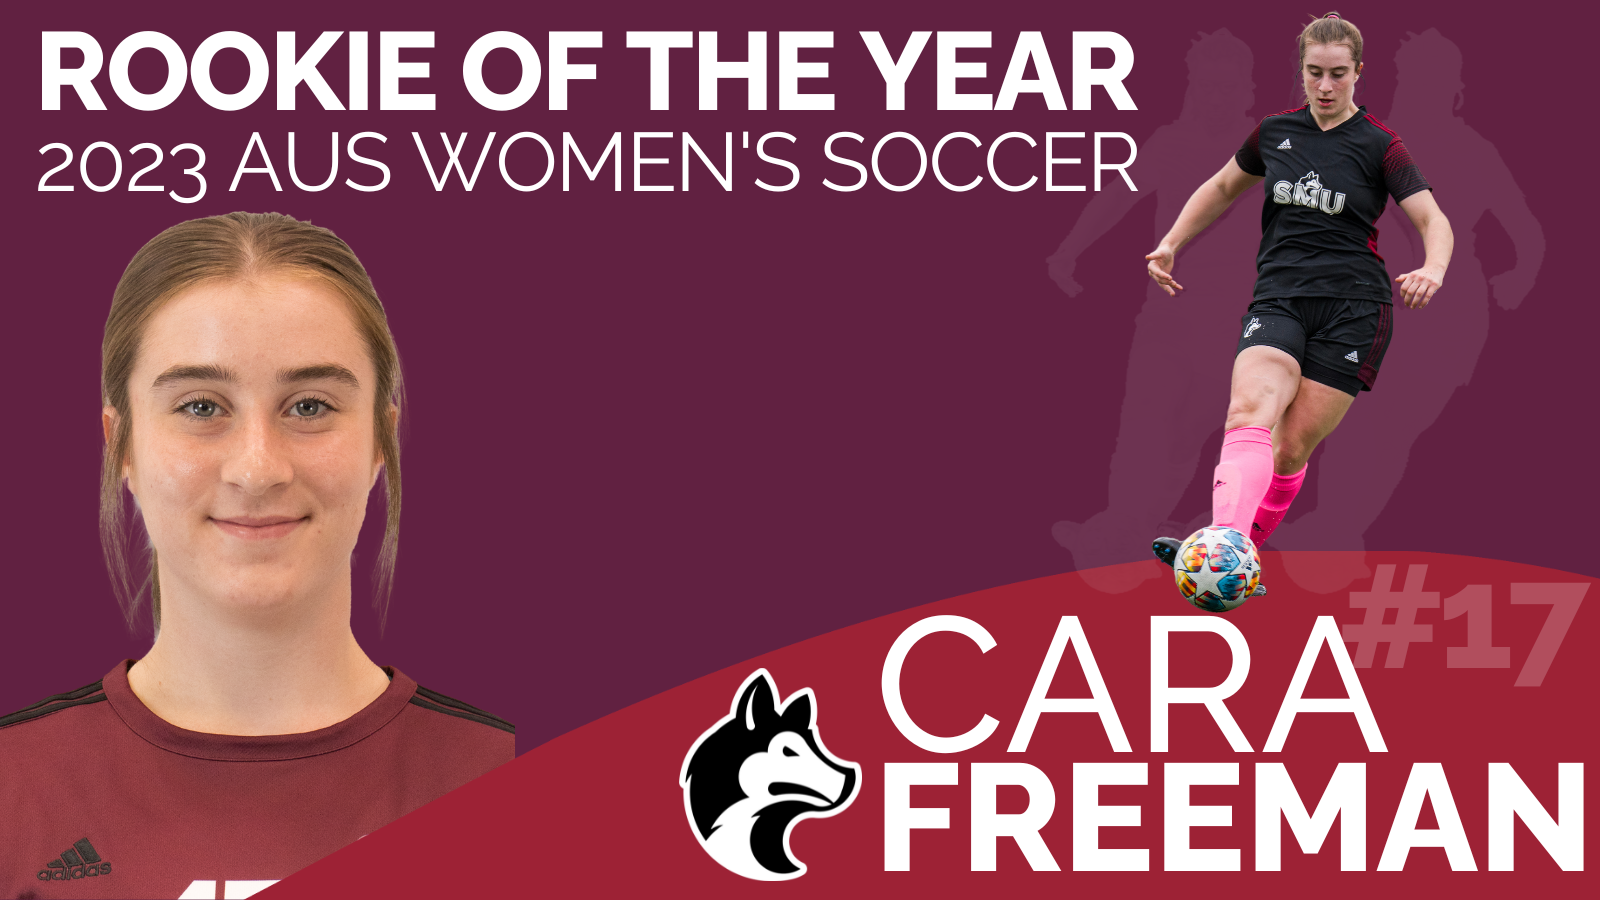 Cara Freeman named 2023 AUS Rookie of the Year, Second Team All-Star